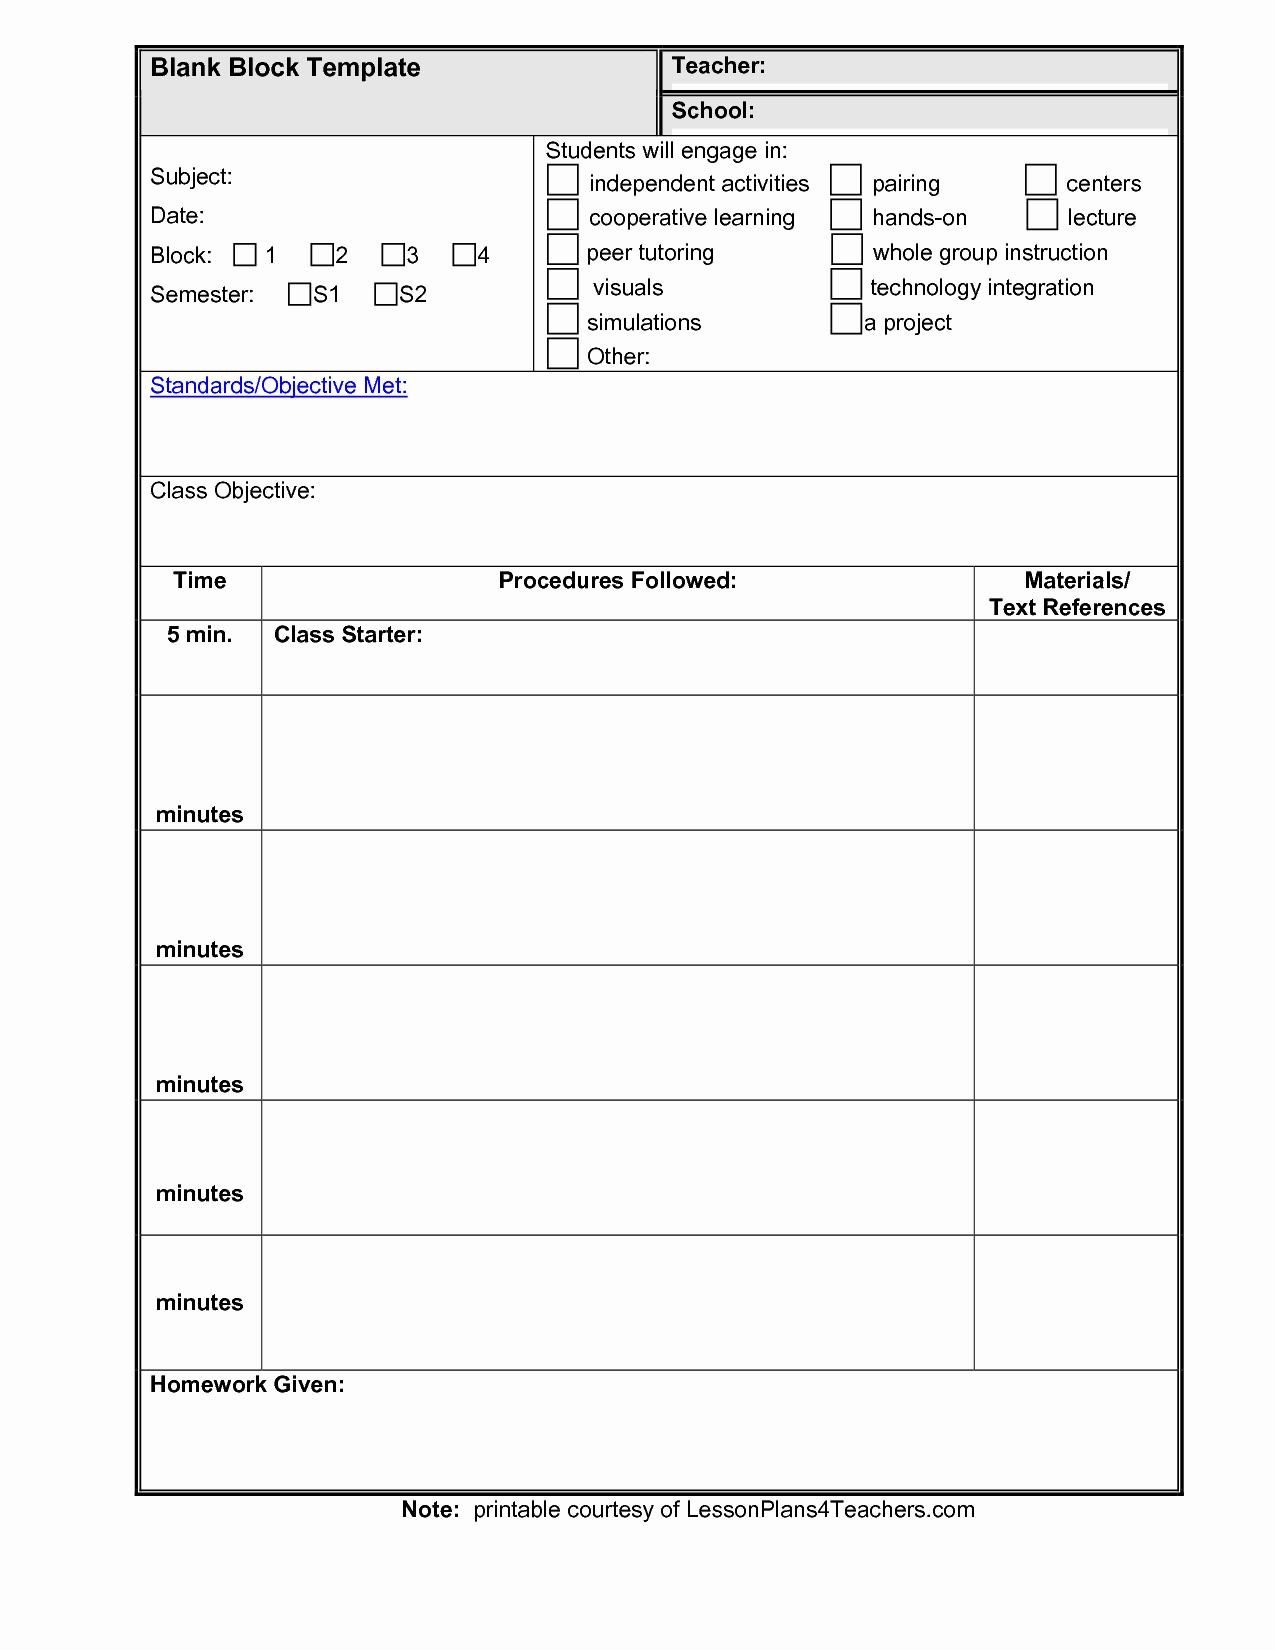 Balanced Literacy Lesson Plan Template Awesome Balanced Literacy Lesson Plan Template